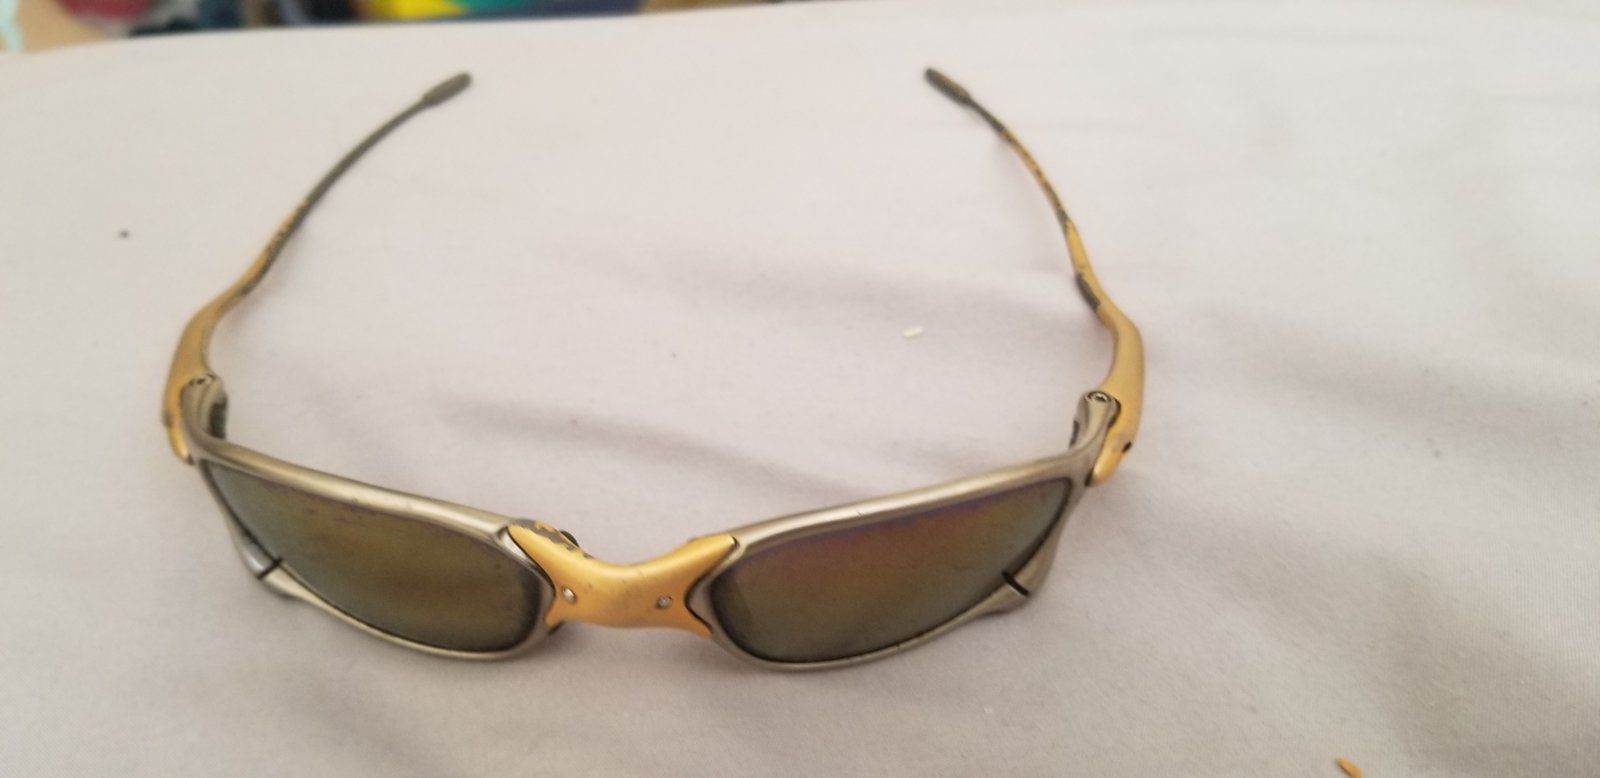 Looking for parts and refurbish | Oakley Forum